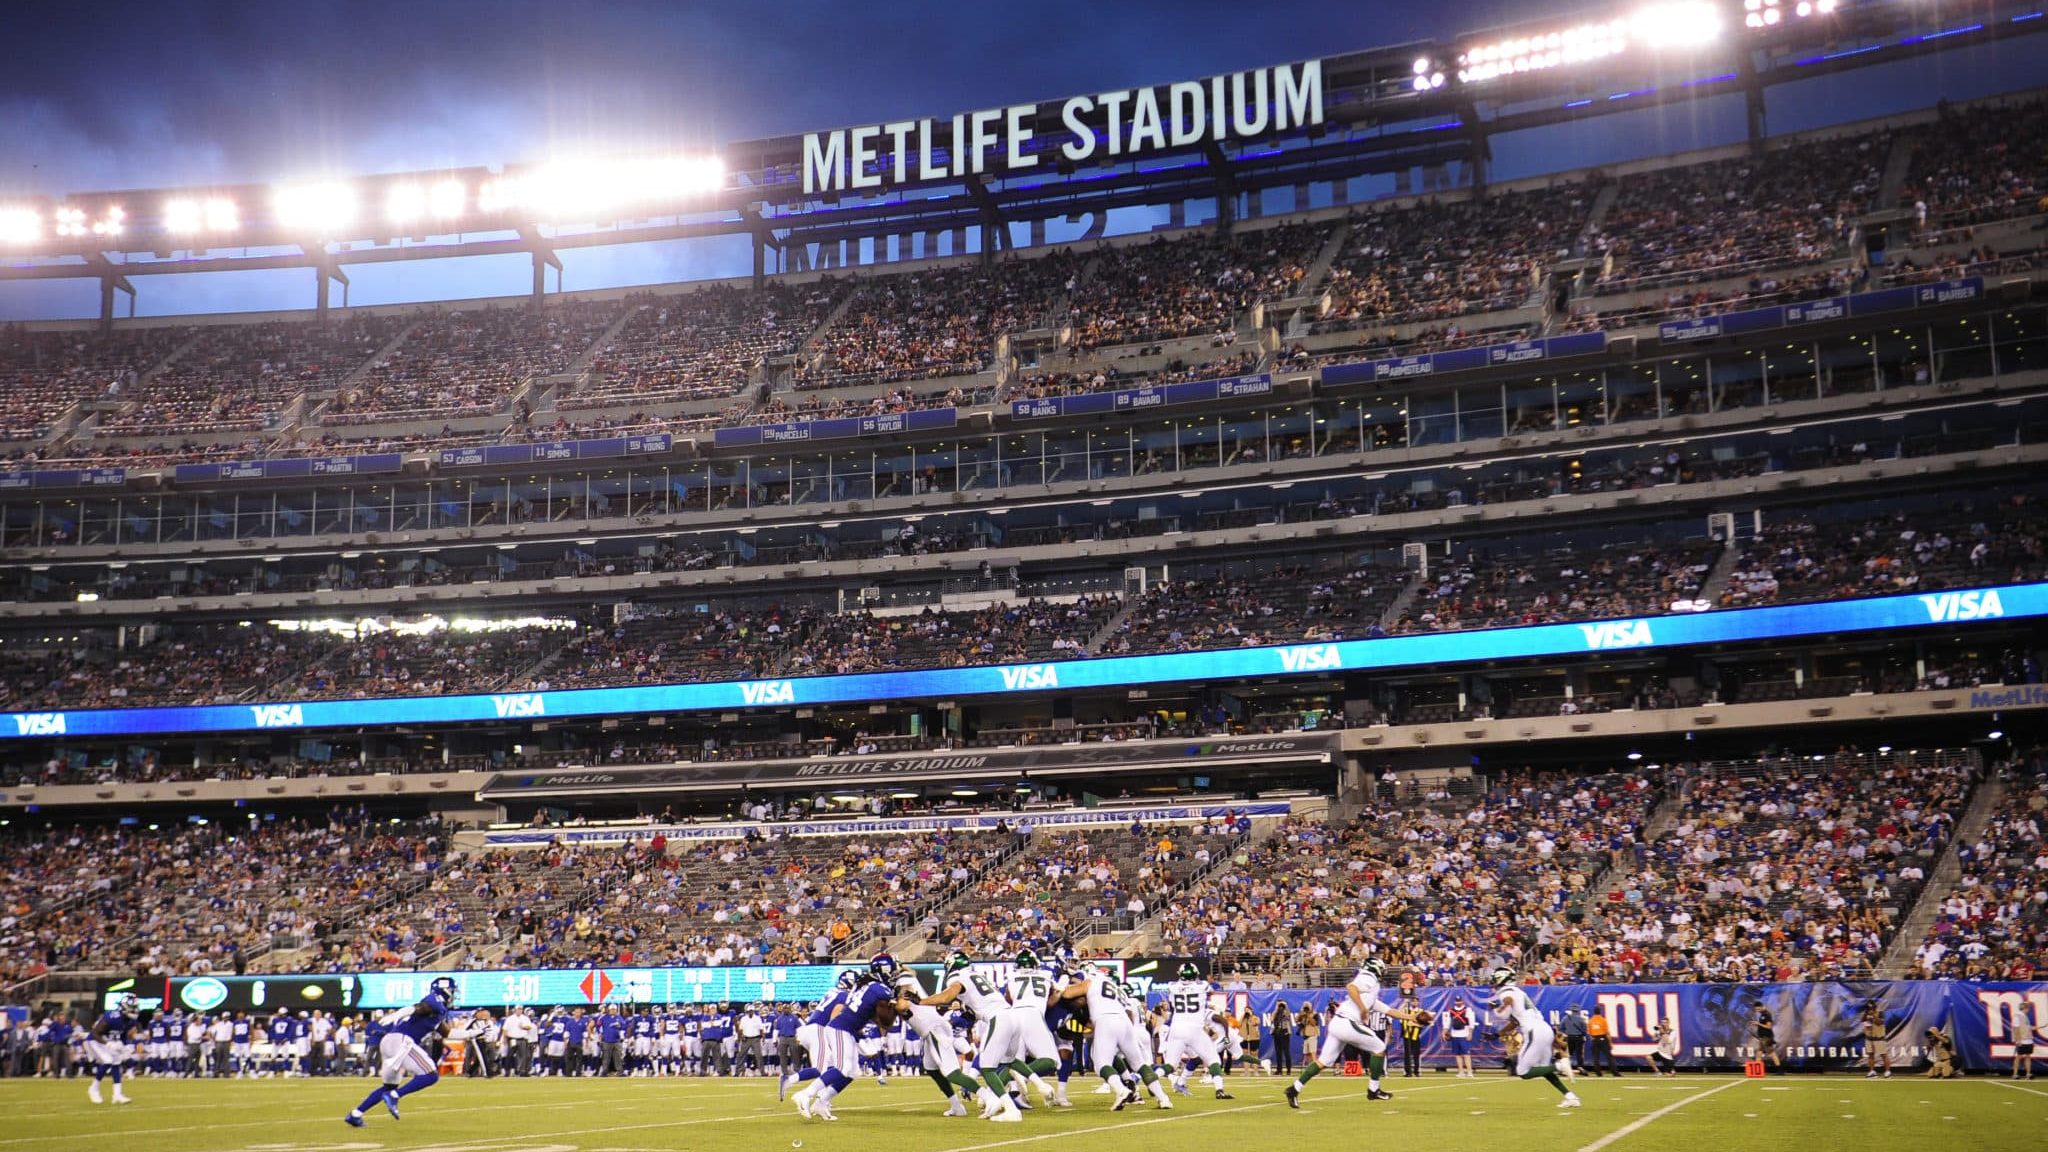 EAST RUTHERFORD, NEW JERSEY - AUGUST 08: A general view of action in the first quarter during a preseason game between the New York Jets and the New York Giants at MetLife Stadium on August 08, 2019 in East Rutherford, New Jersey.